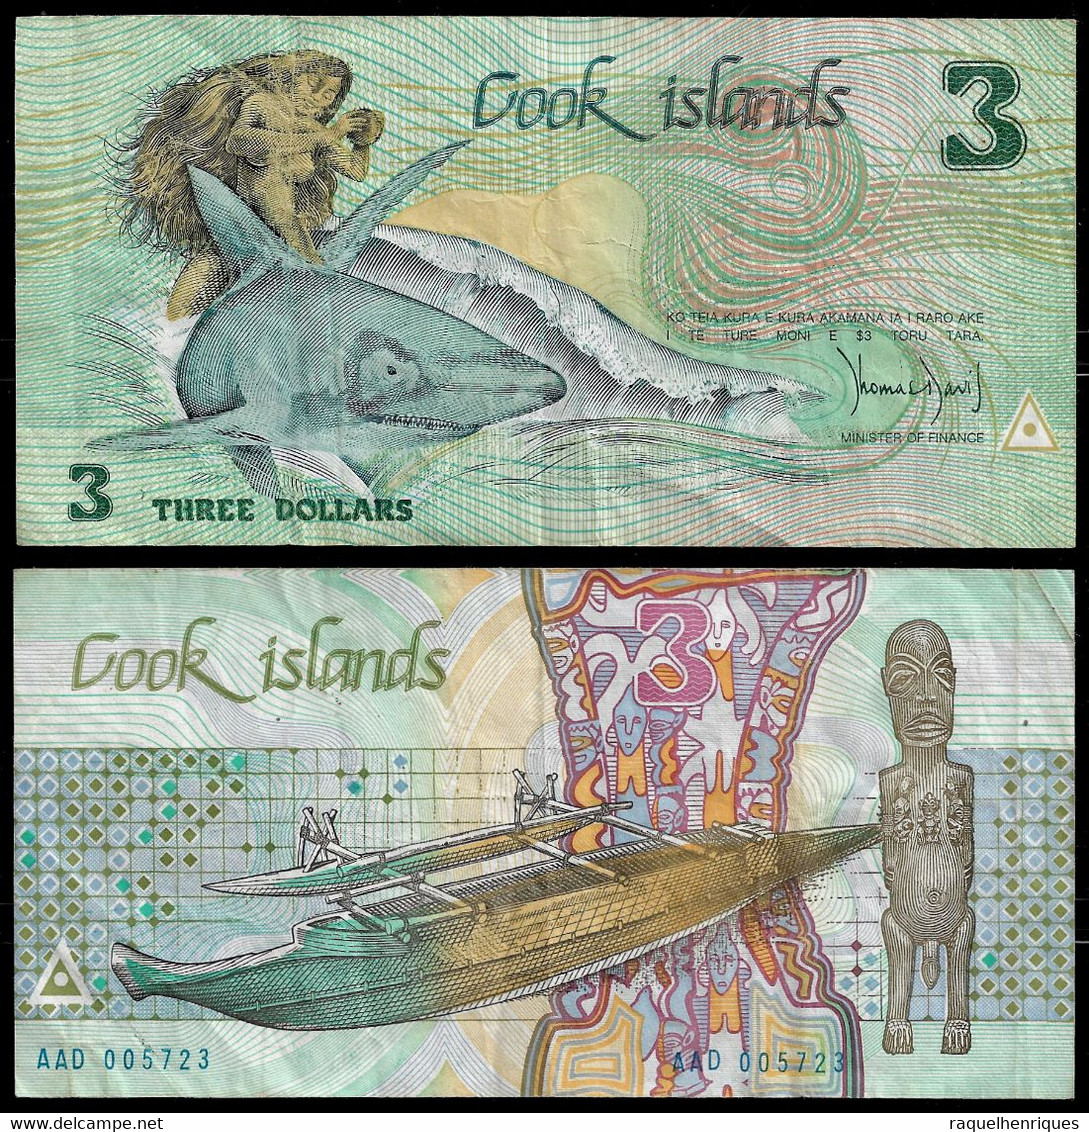 COOK ISLANDS BANKNOTE - 3 DOLLARS (1987) P#3 F/VF (NT#02) - Cook